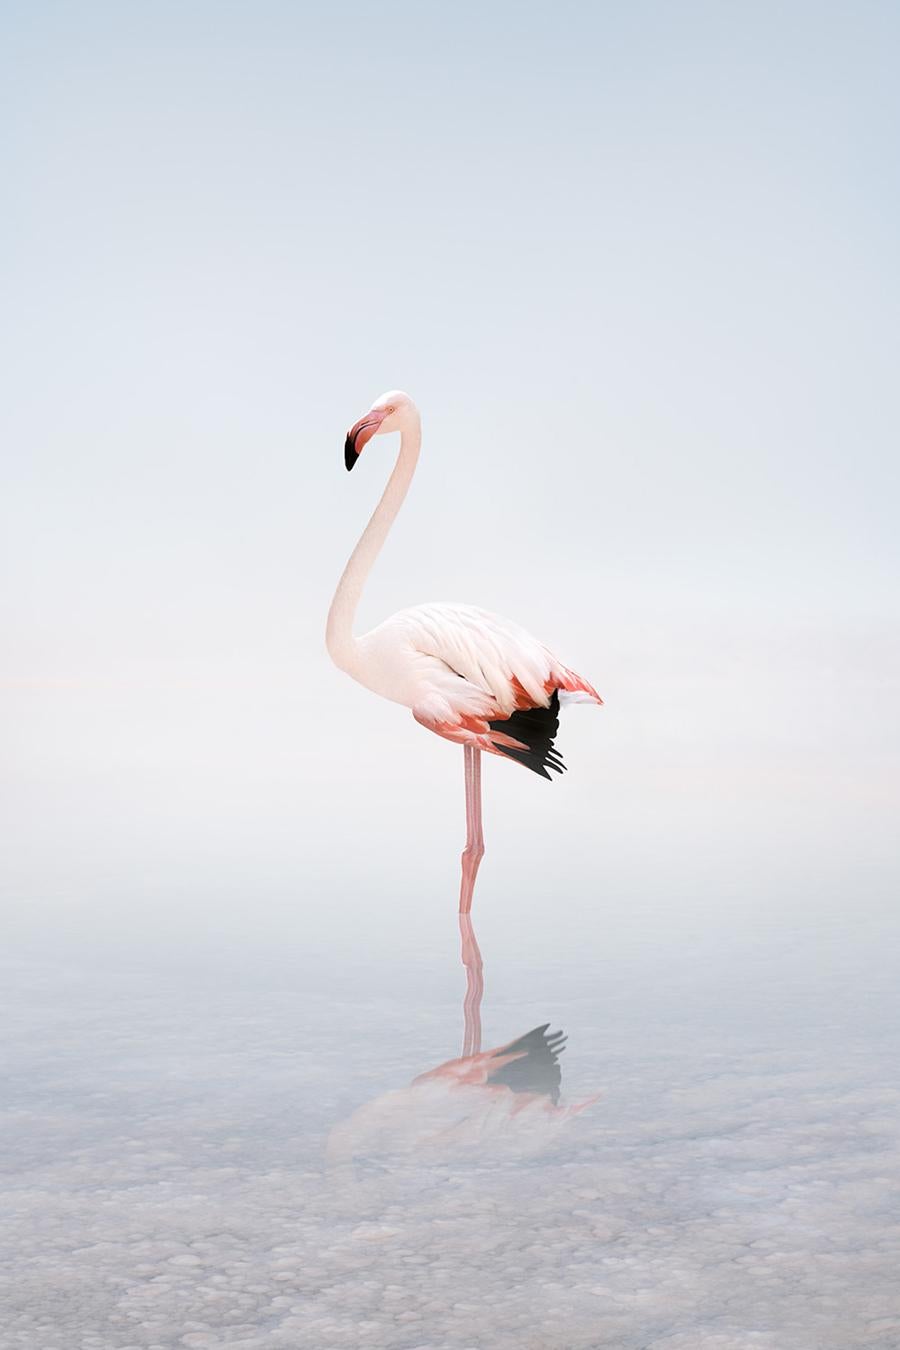 Wondering White Flamingo
Series: Meditations
Photo-based painting on Canson Infinity Rag Photographique

Available sizes
30 x 20 in     Edition of 15
40 x 27 in     Edition of 12
60 x 40 in     Edition of 10

In this series, Zilberberg creates